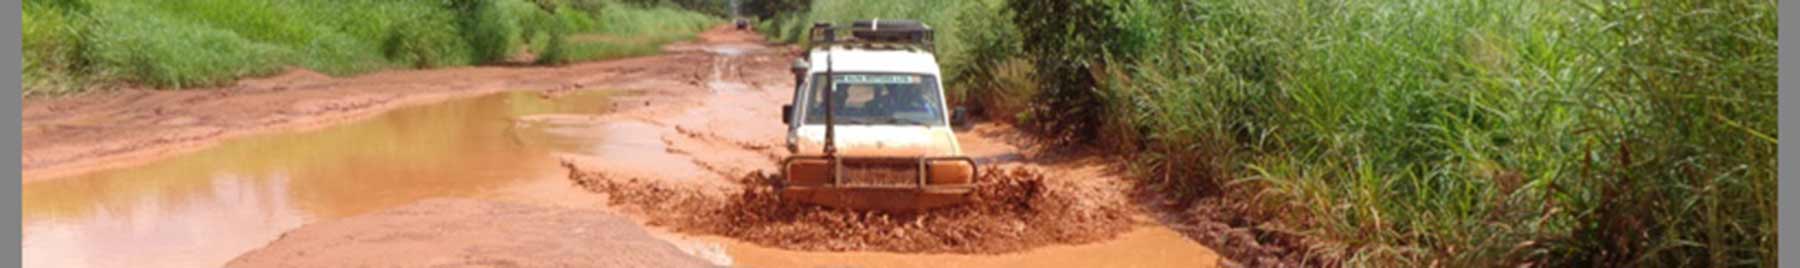 Jeep driving through red dirt in Africa